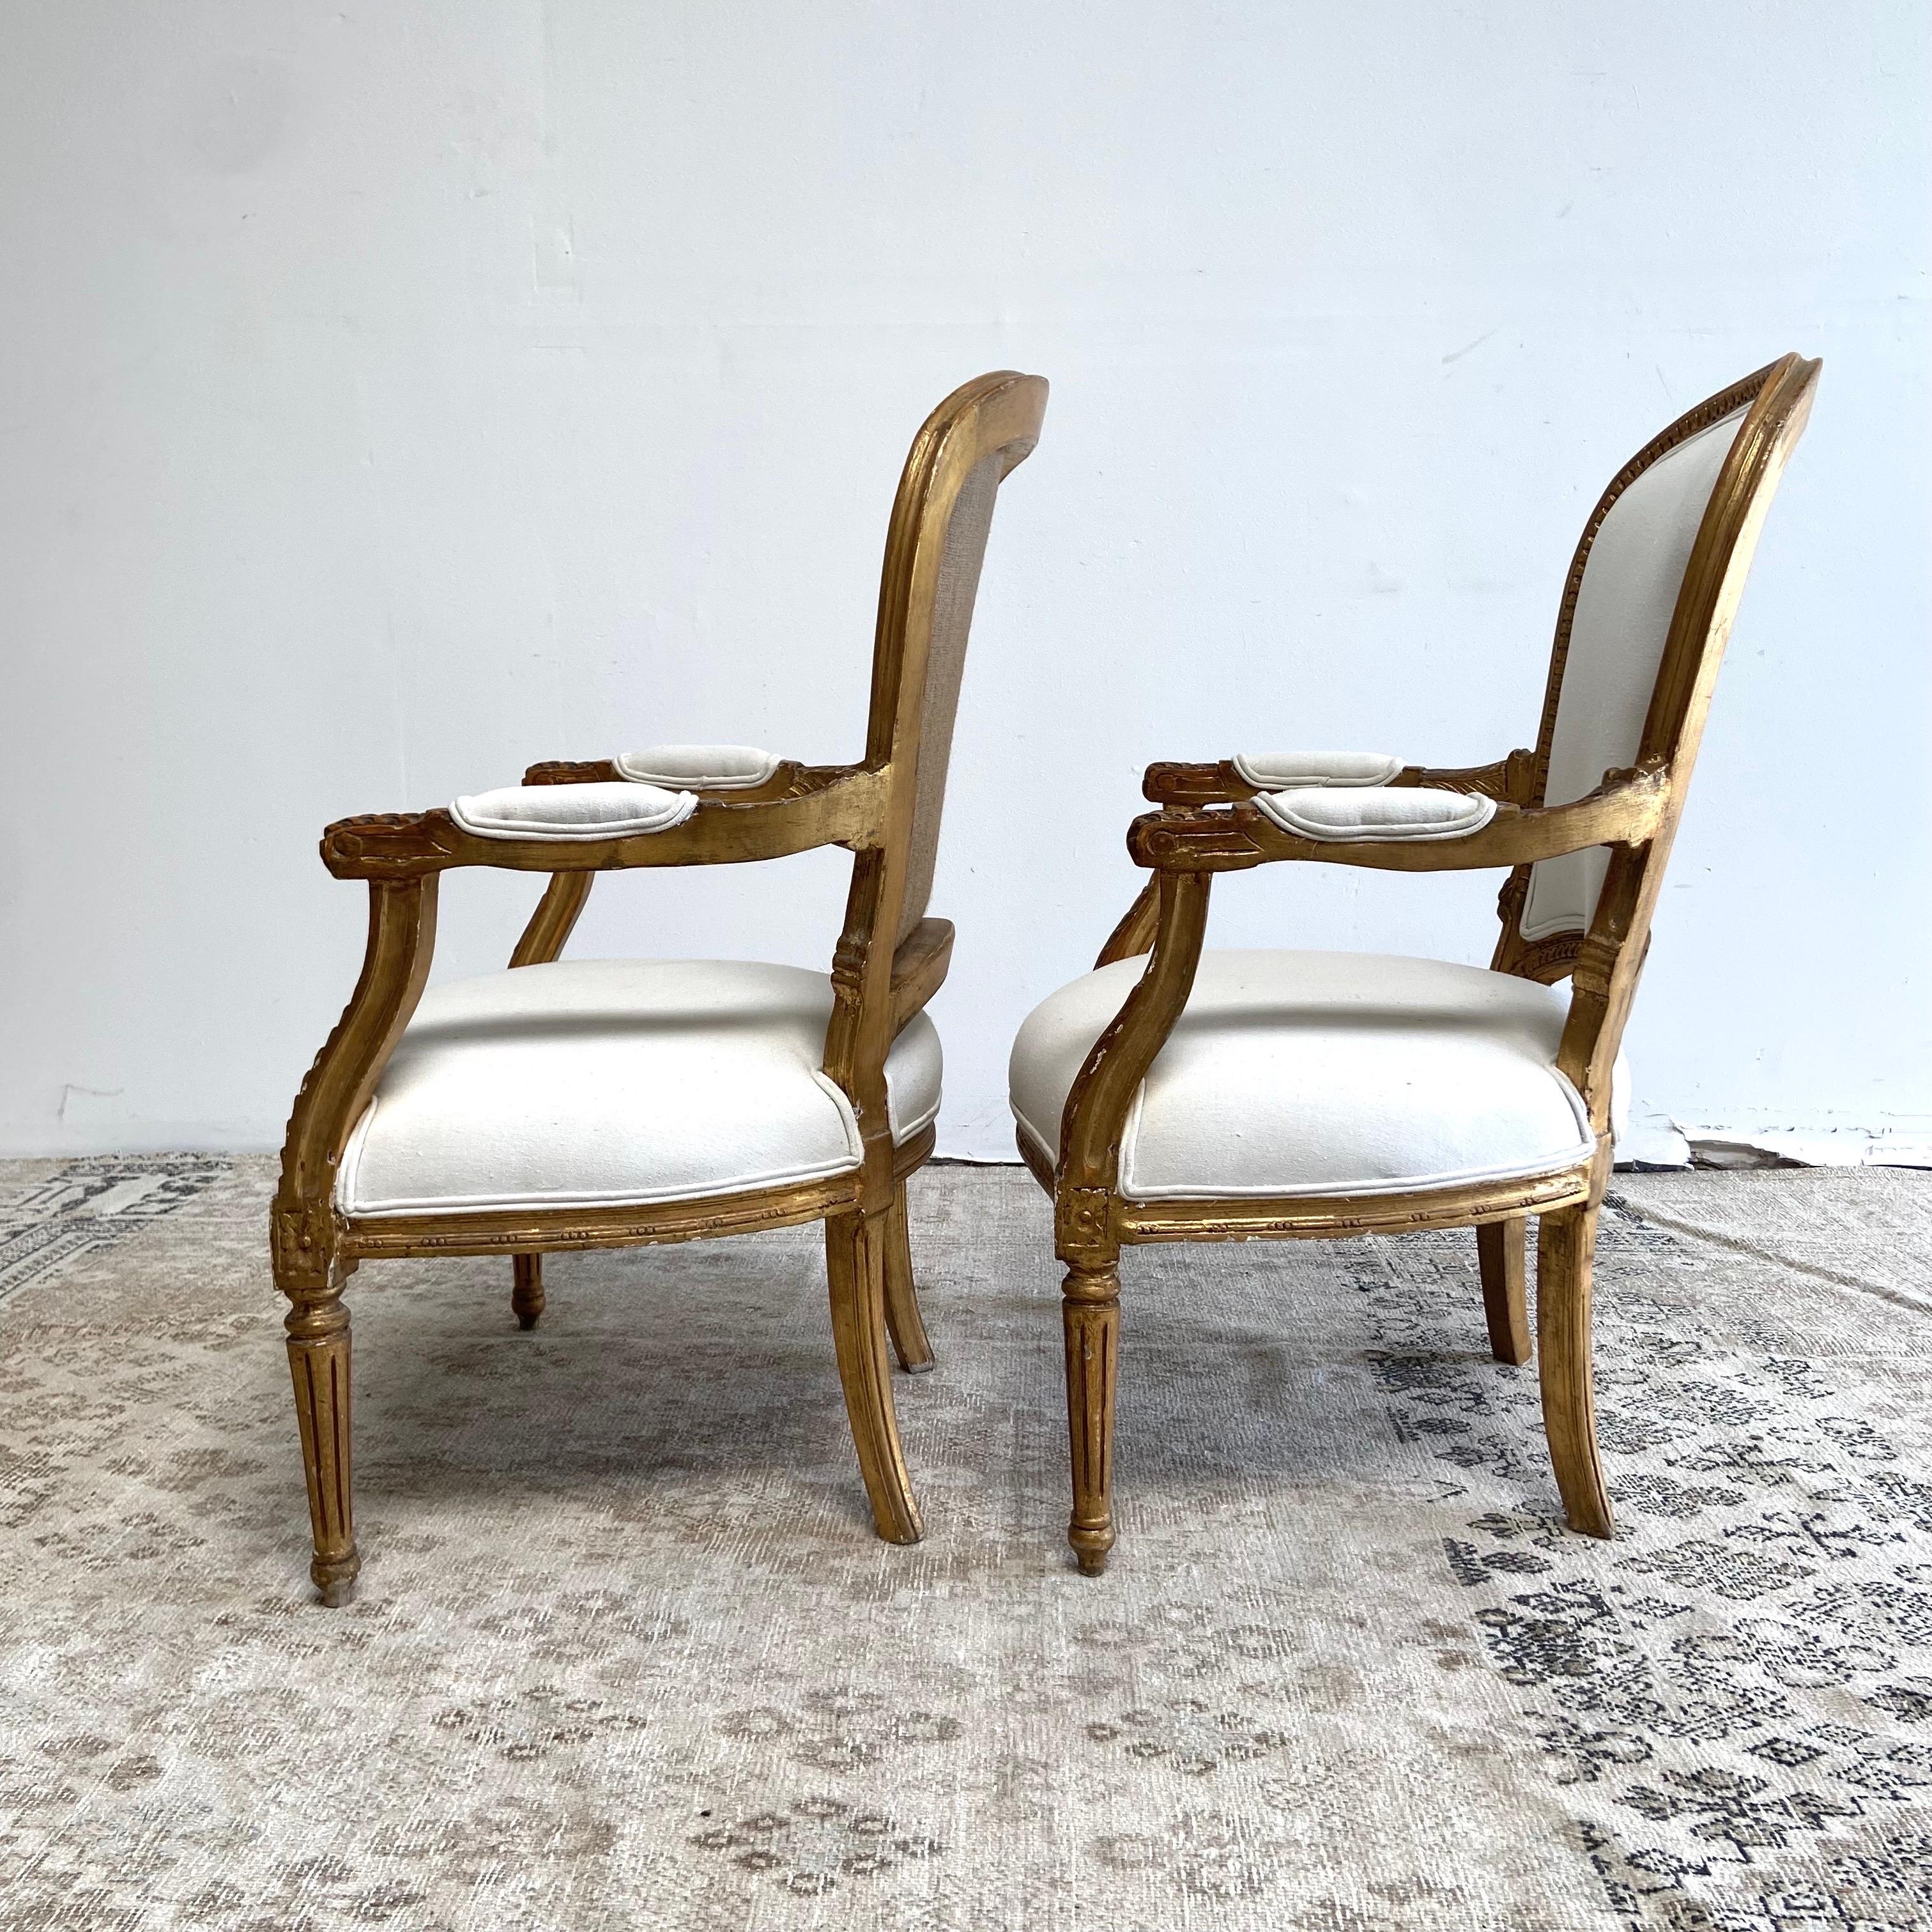 Vintage French Style Louis XVI Open Arm Chairs with Linen Upholstery For Sale 2